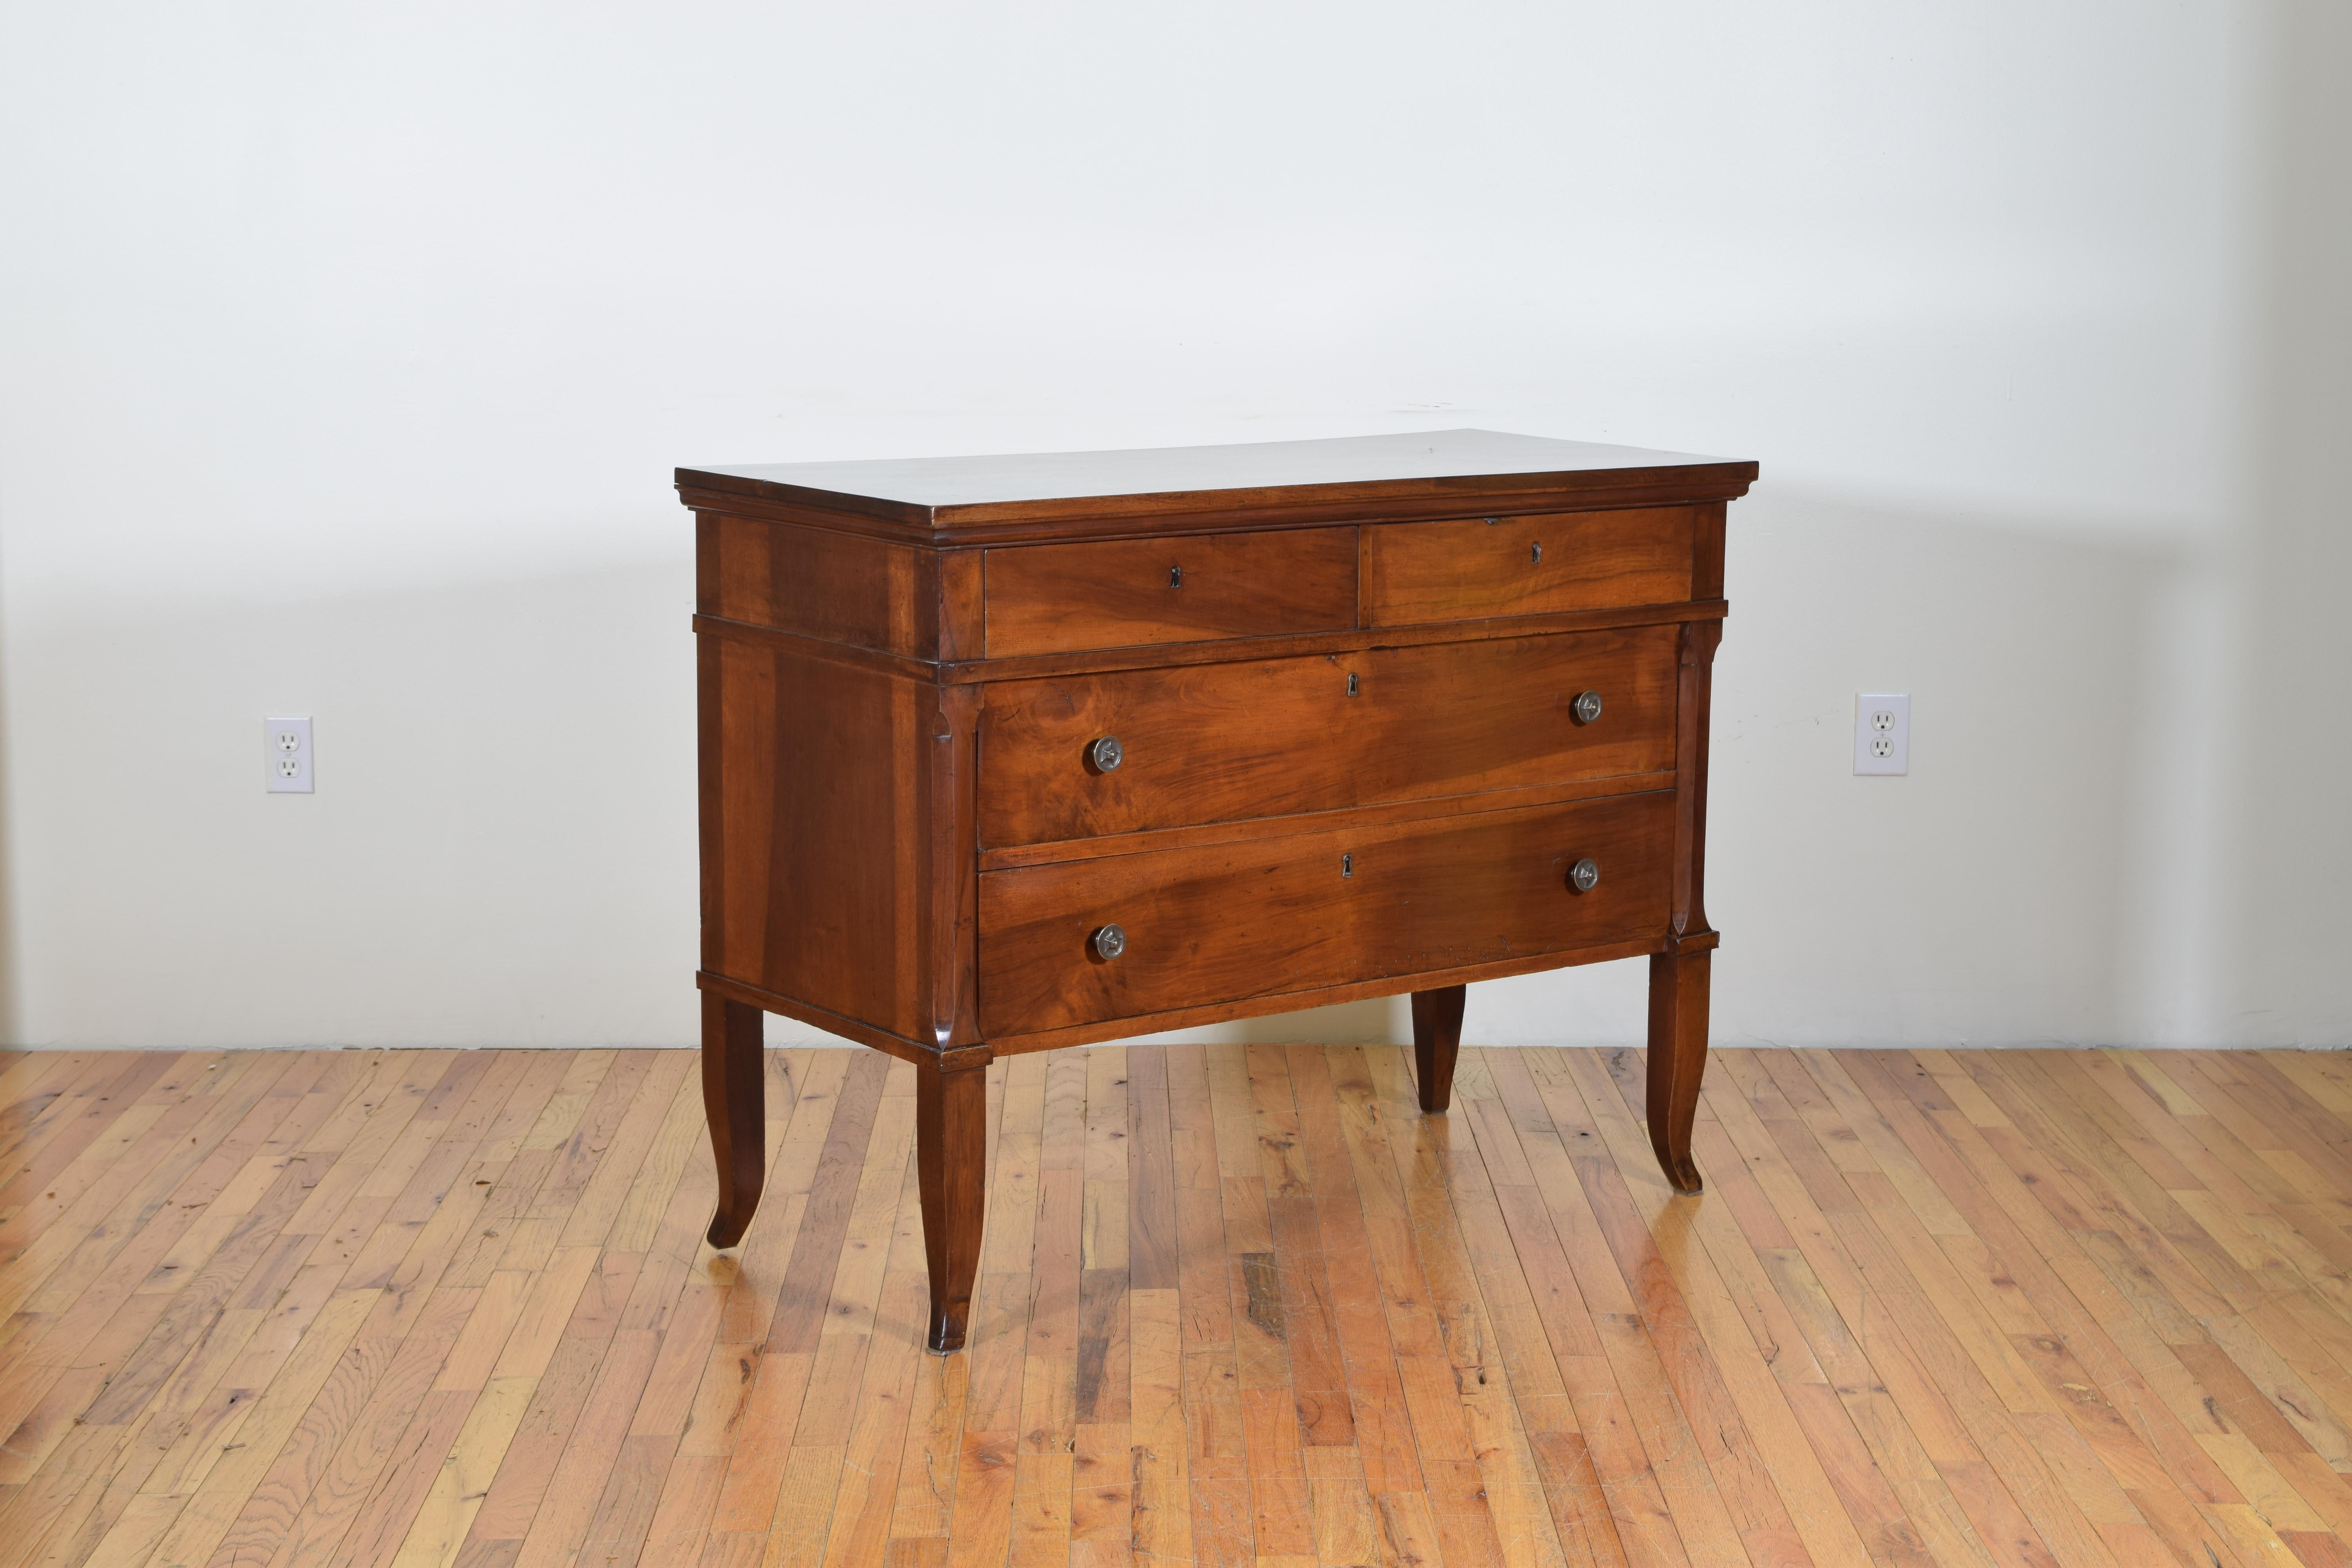 Constructed of solid walnut and poplar as a secondary (interior) wood this commode has a rectangular top above a conforming case housing two small drawers over two larger drawers, the front corners of the commode are slightly tapered inward, raised